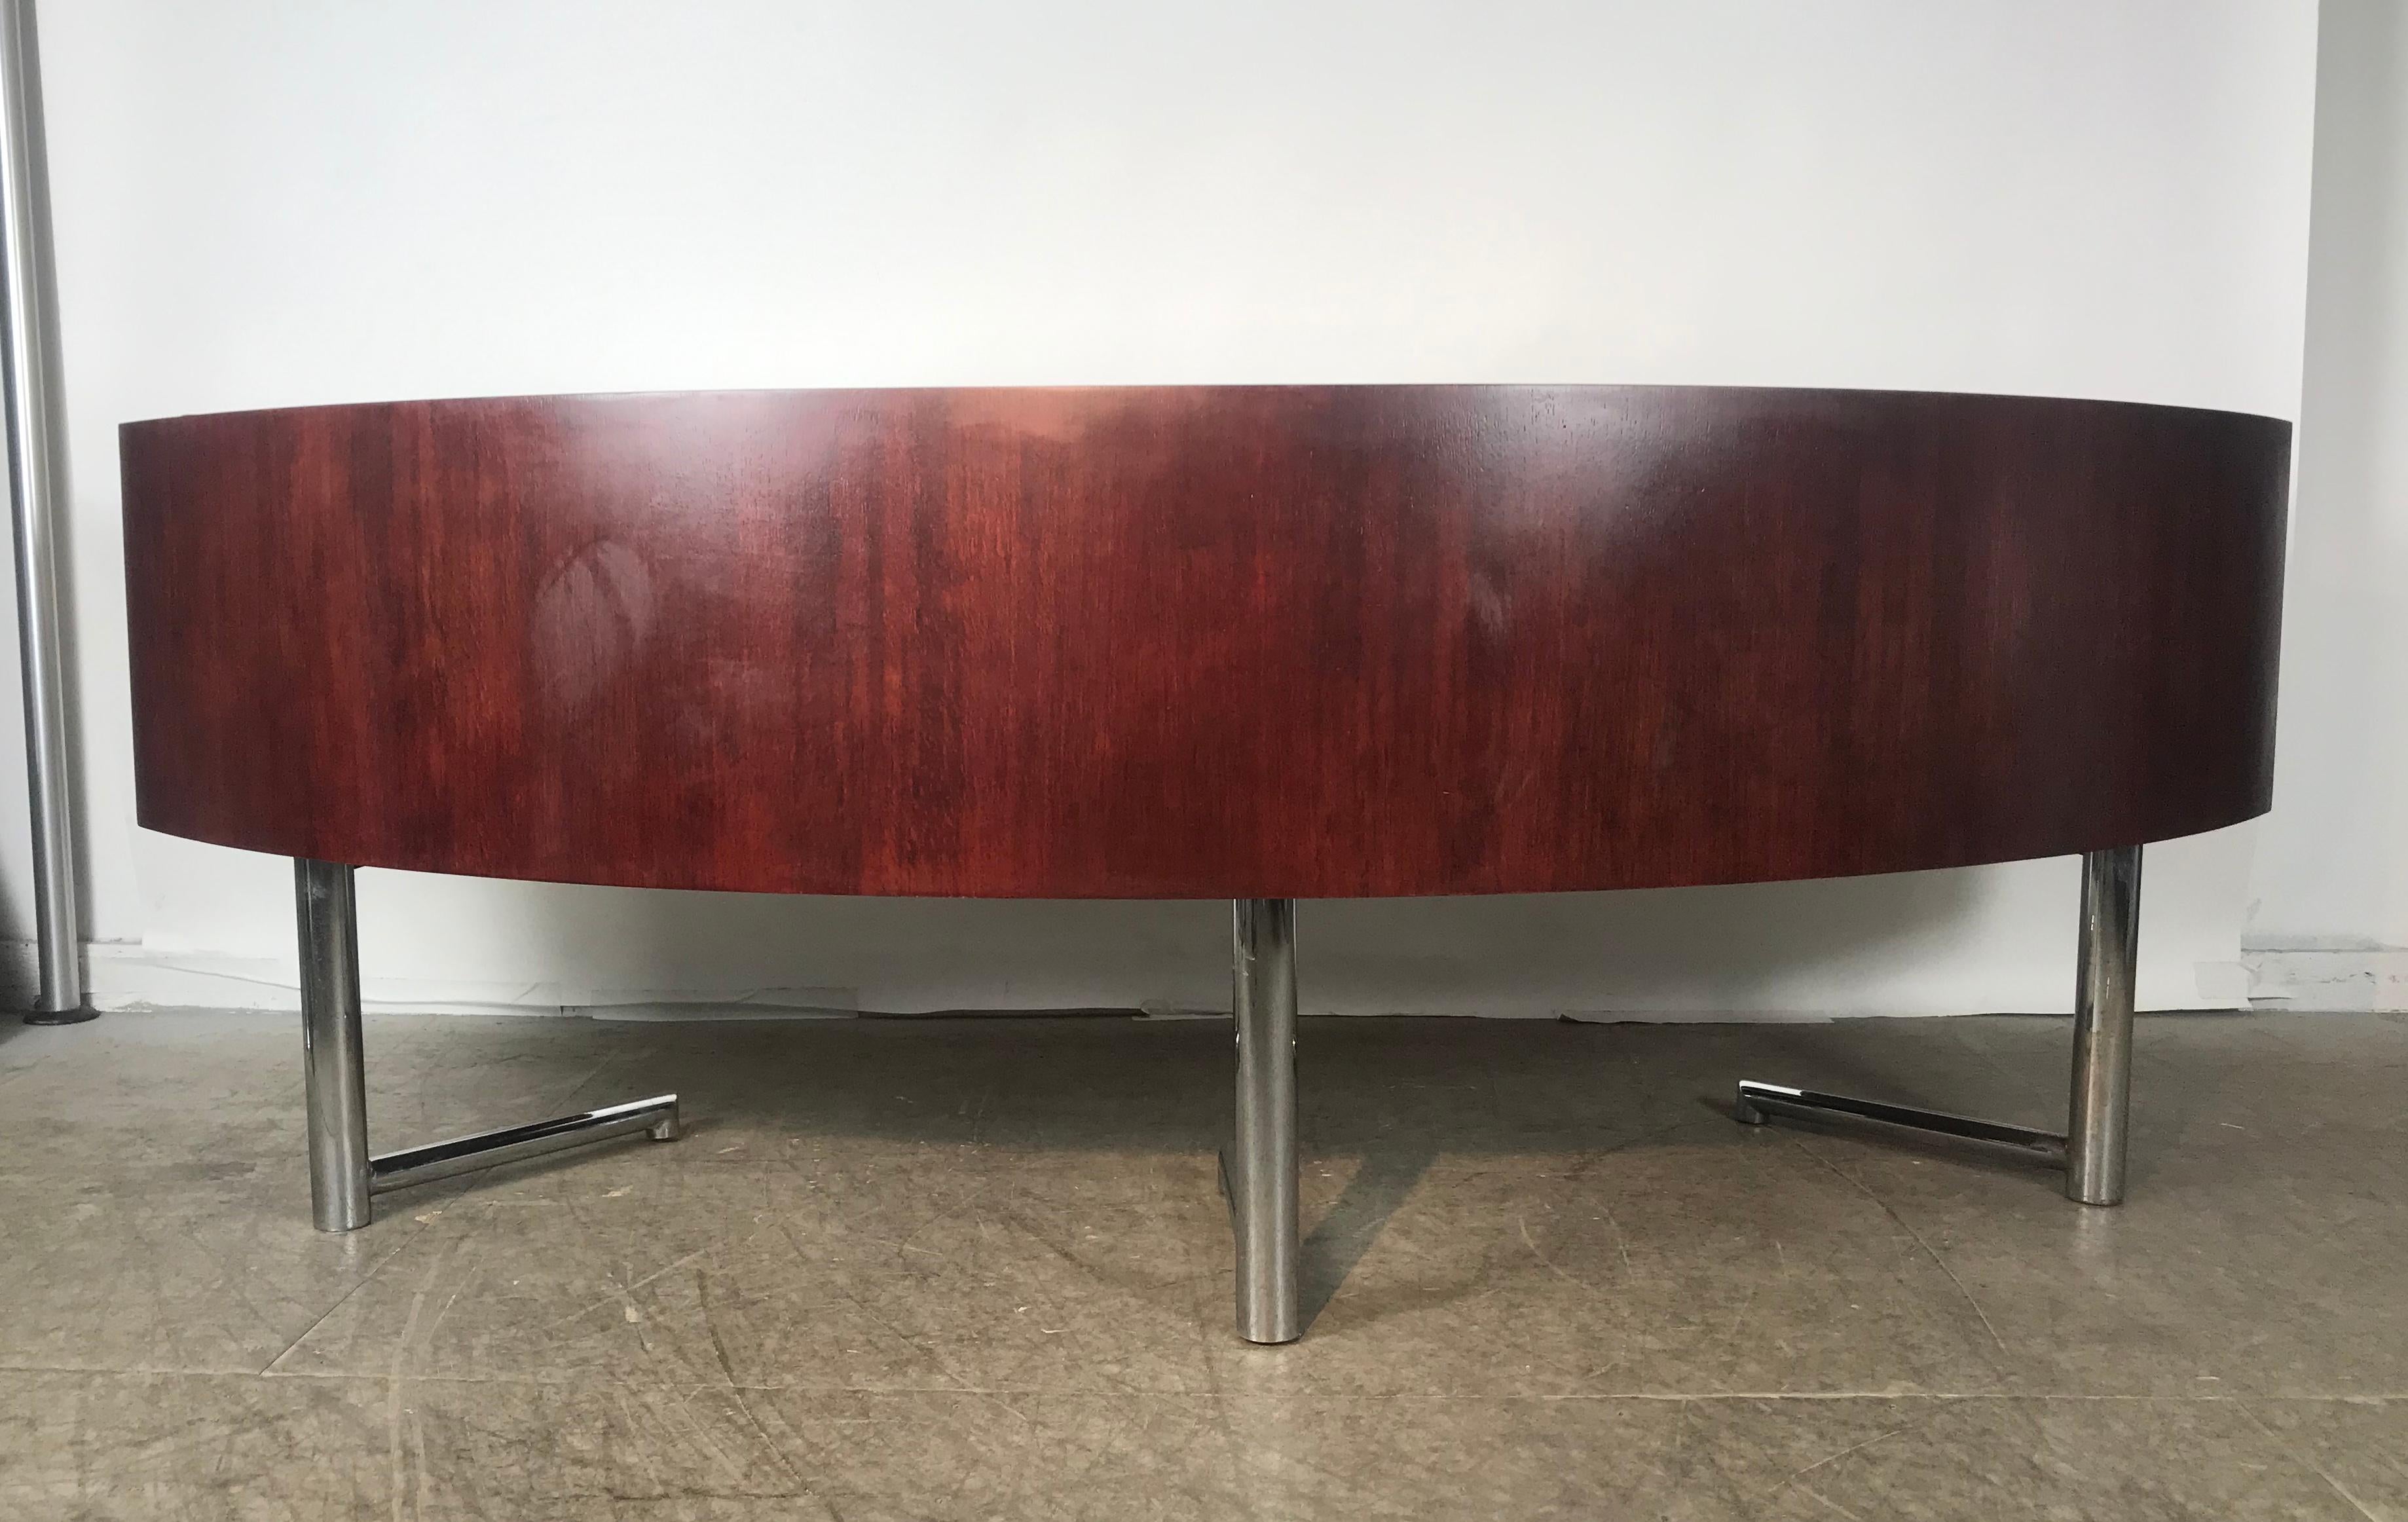 Rare Curved Desk on Chrome-Plated Base, Designed by Leif Jacobsen 1